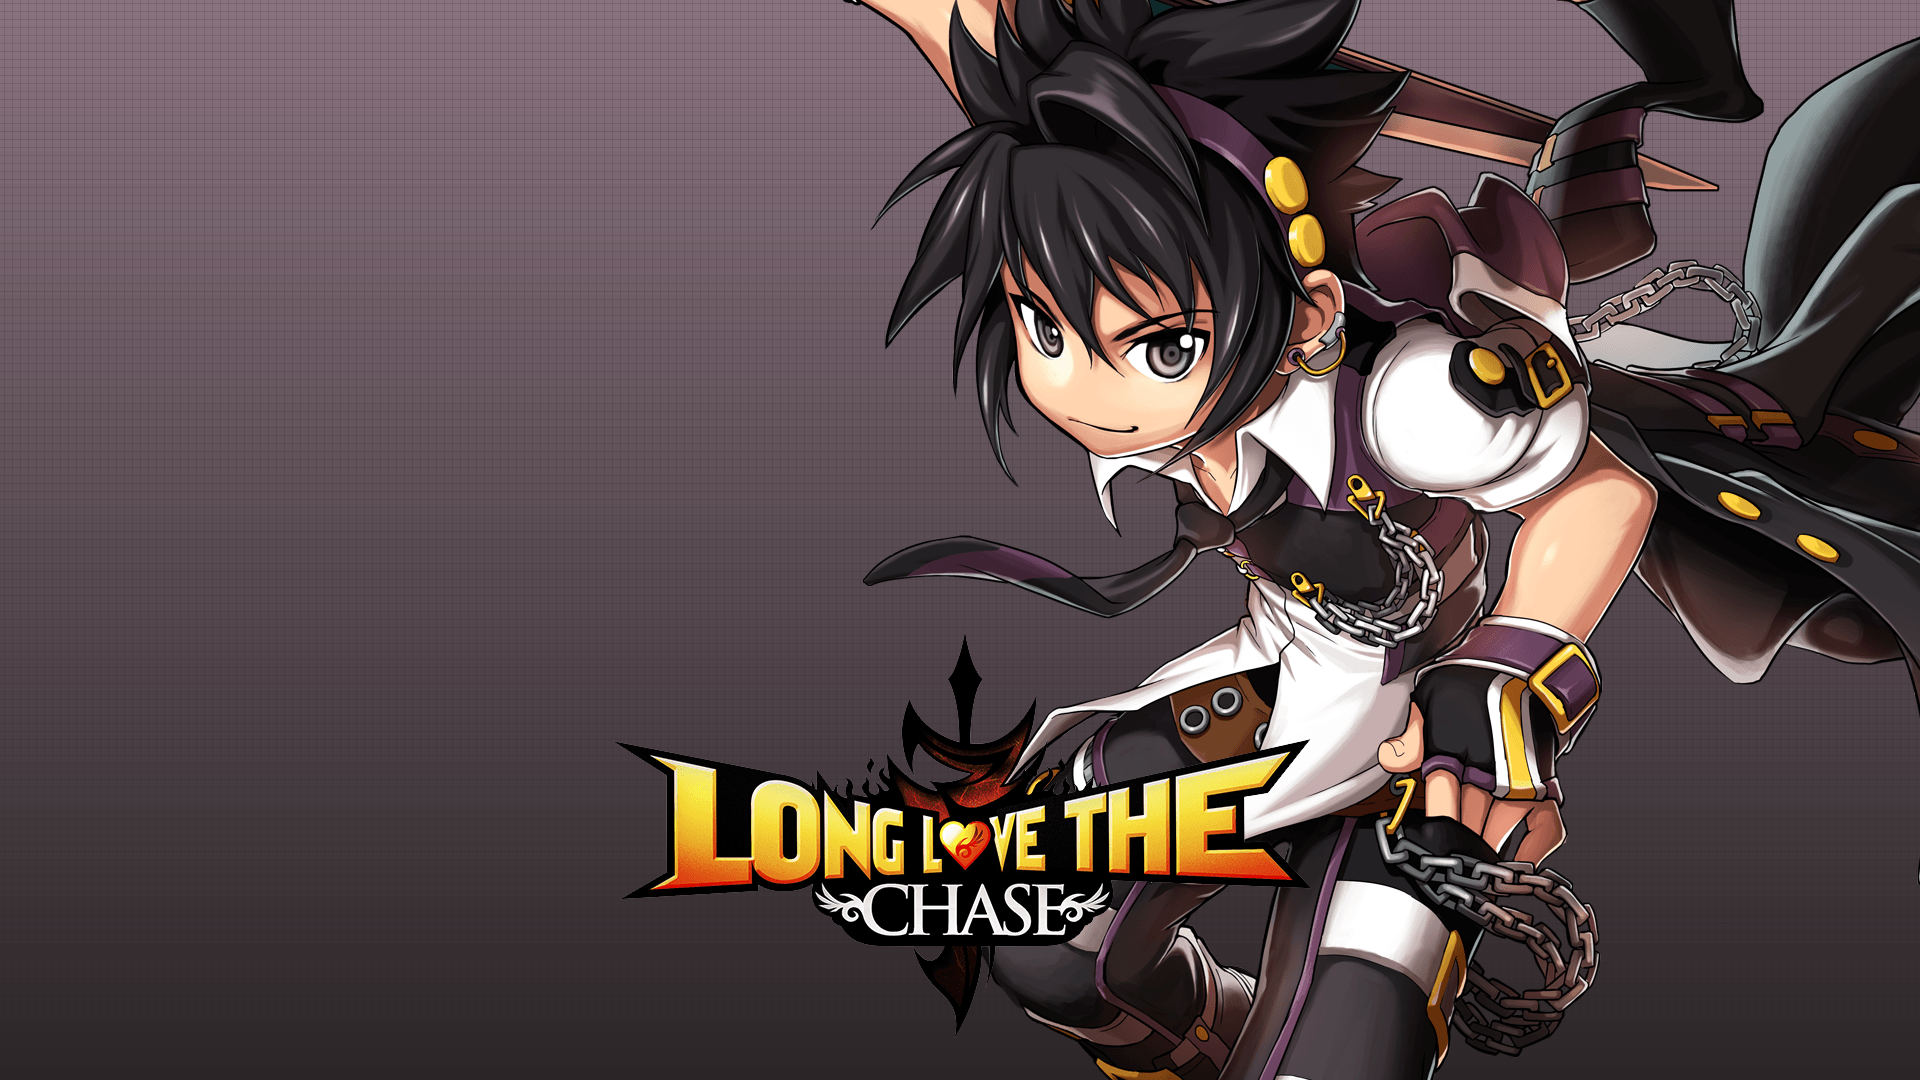 Grand Chase HD desktop wallpaper featuring an animated character with the slogan 'Long Live the Chase' set against a dark background.